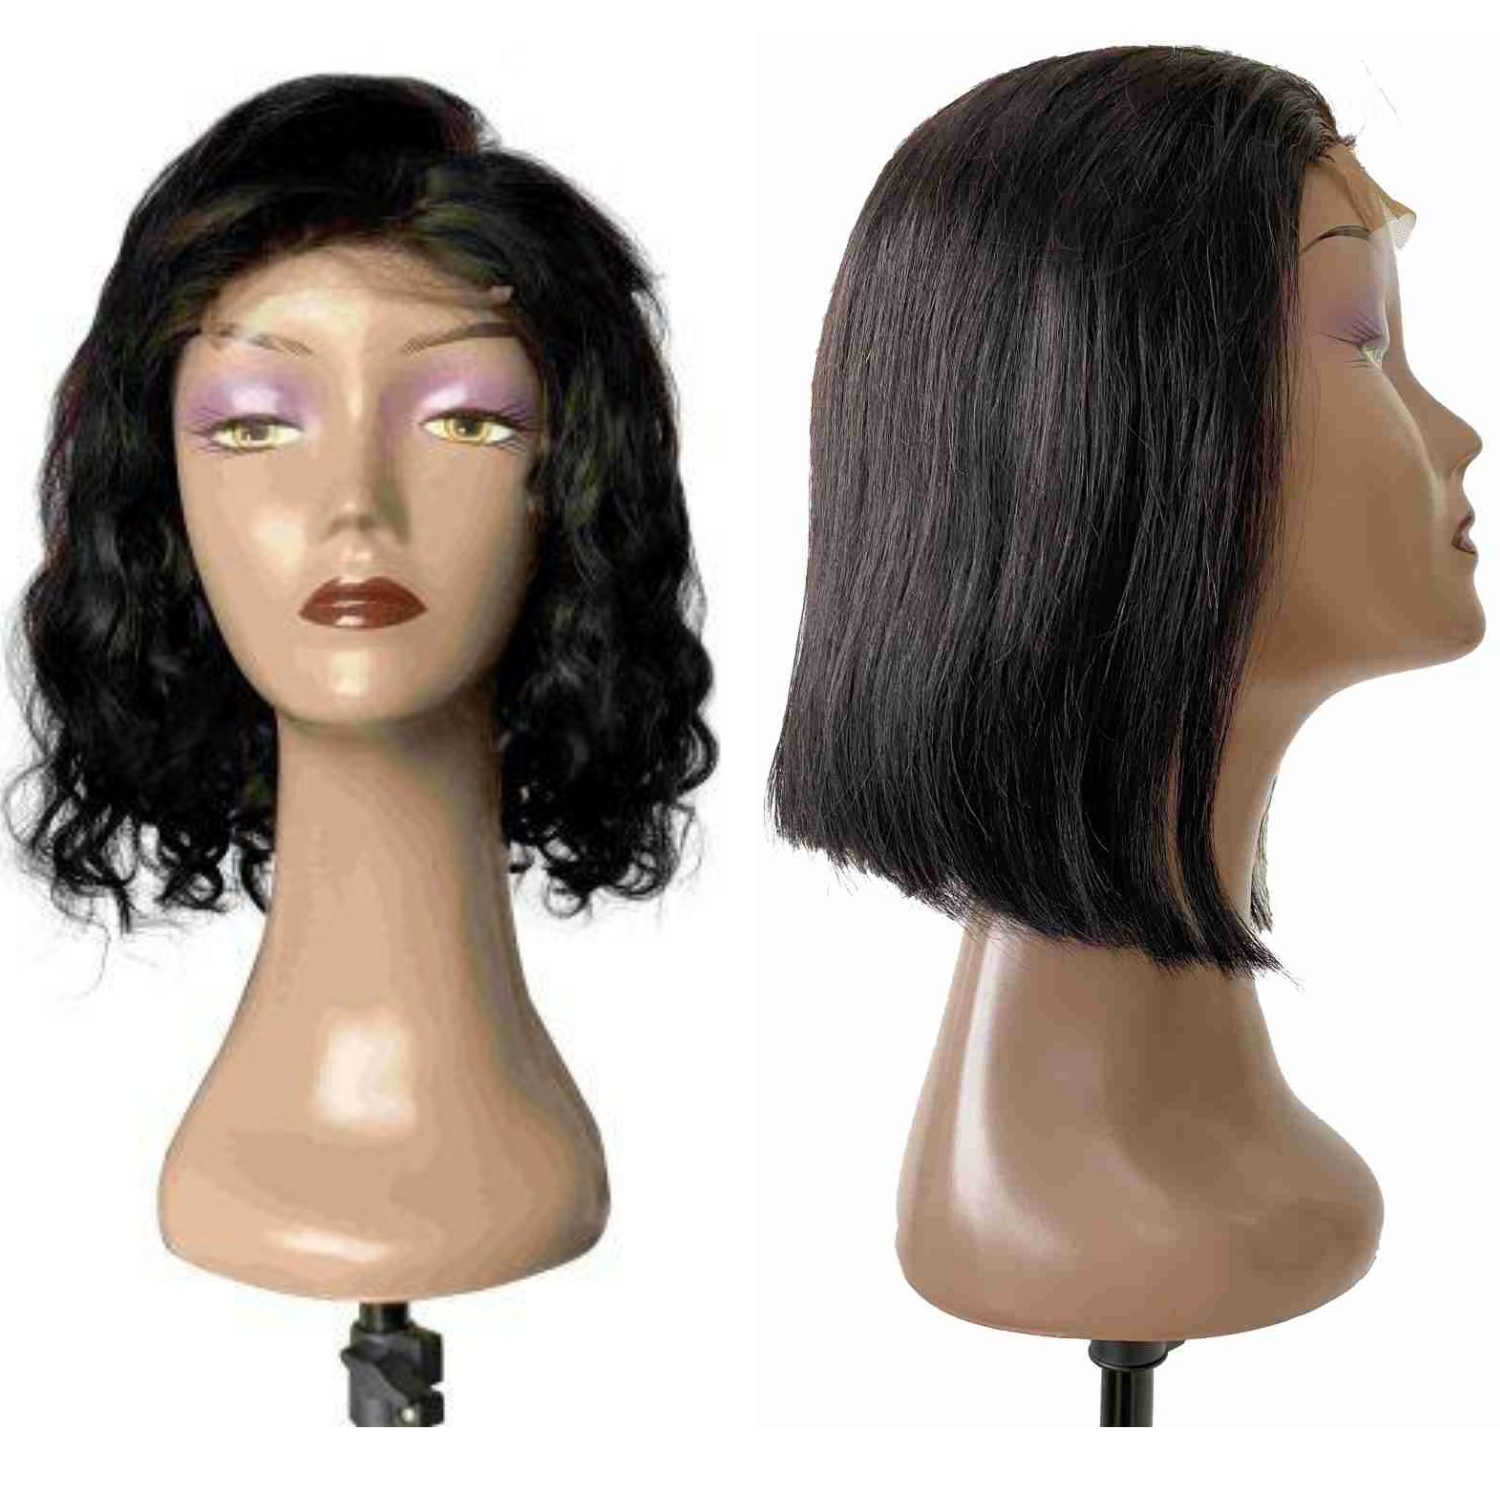 180% Density 4x4 Lace Closure Bob Wig Pre-styled Direct Use Unprocessed Ship/Pick up